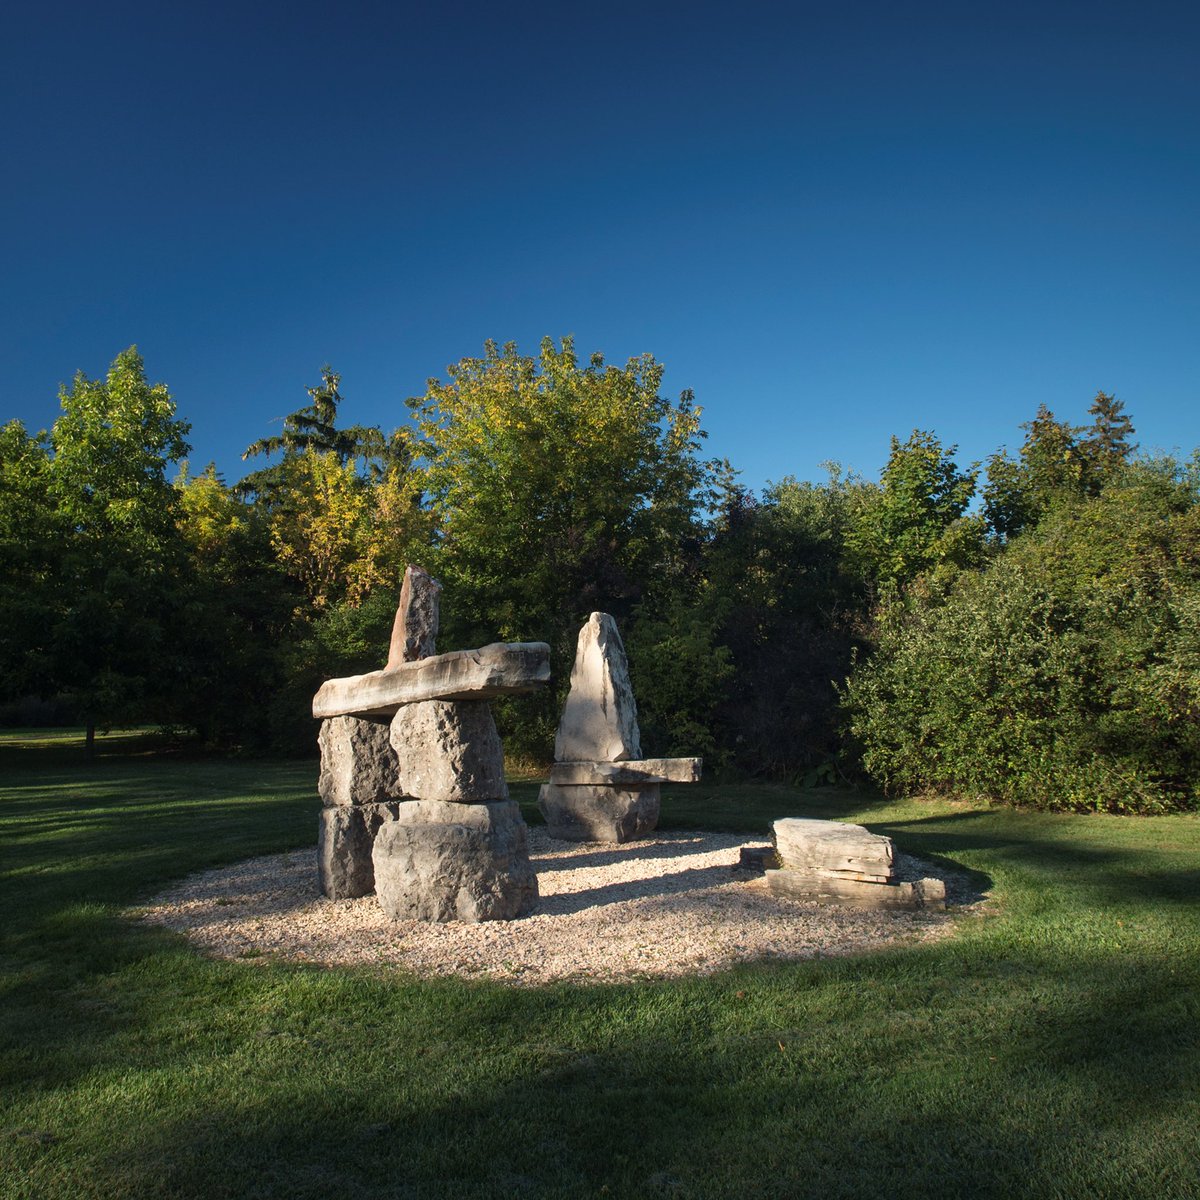 Join AGG’s founding Director Judith Nasby for a talk and the launch of her new book – Kivioq's Journey and Other Revelations in the Donald Forster Sculpture Park – at the Guelph Civic Museum on Tuesday, October 3, at 7:30 pm, an event presented by @GuelphHistSoc